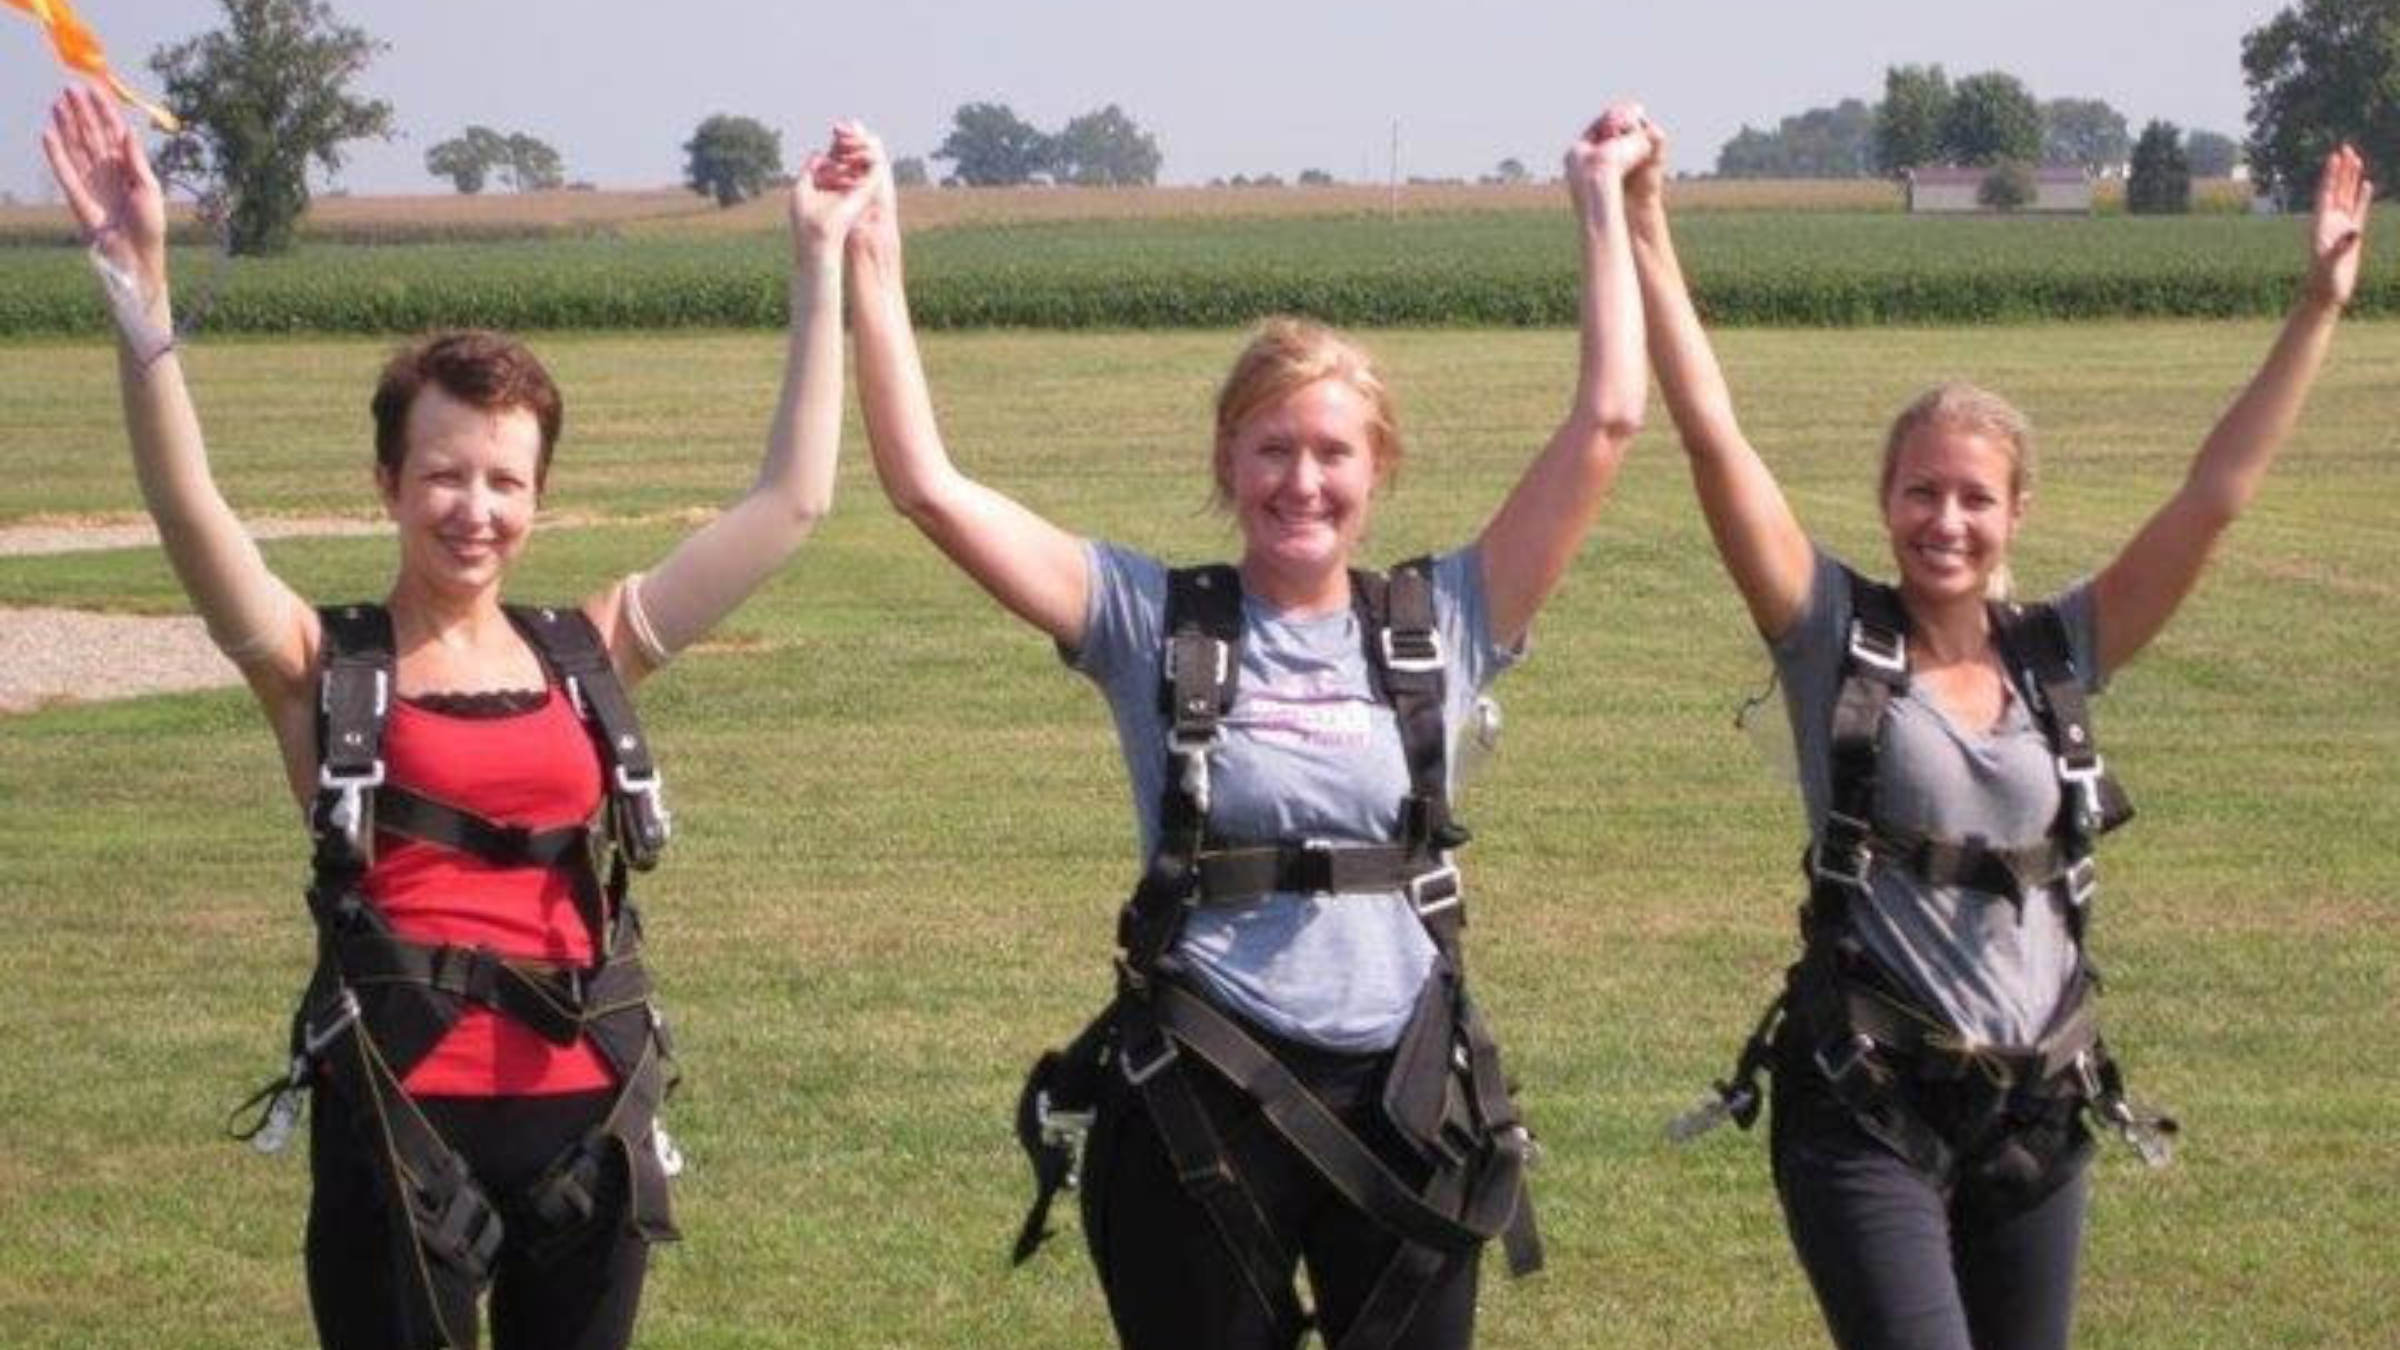 Lori Gill Grennan and friends cheering after skydiving together